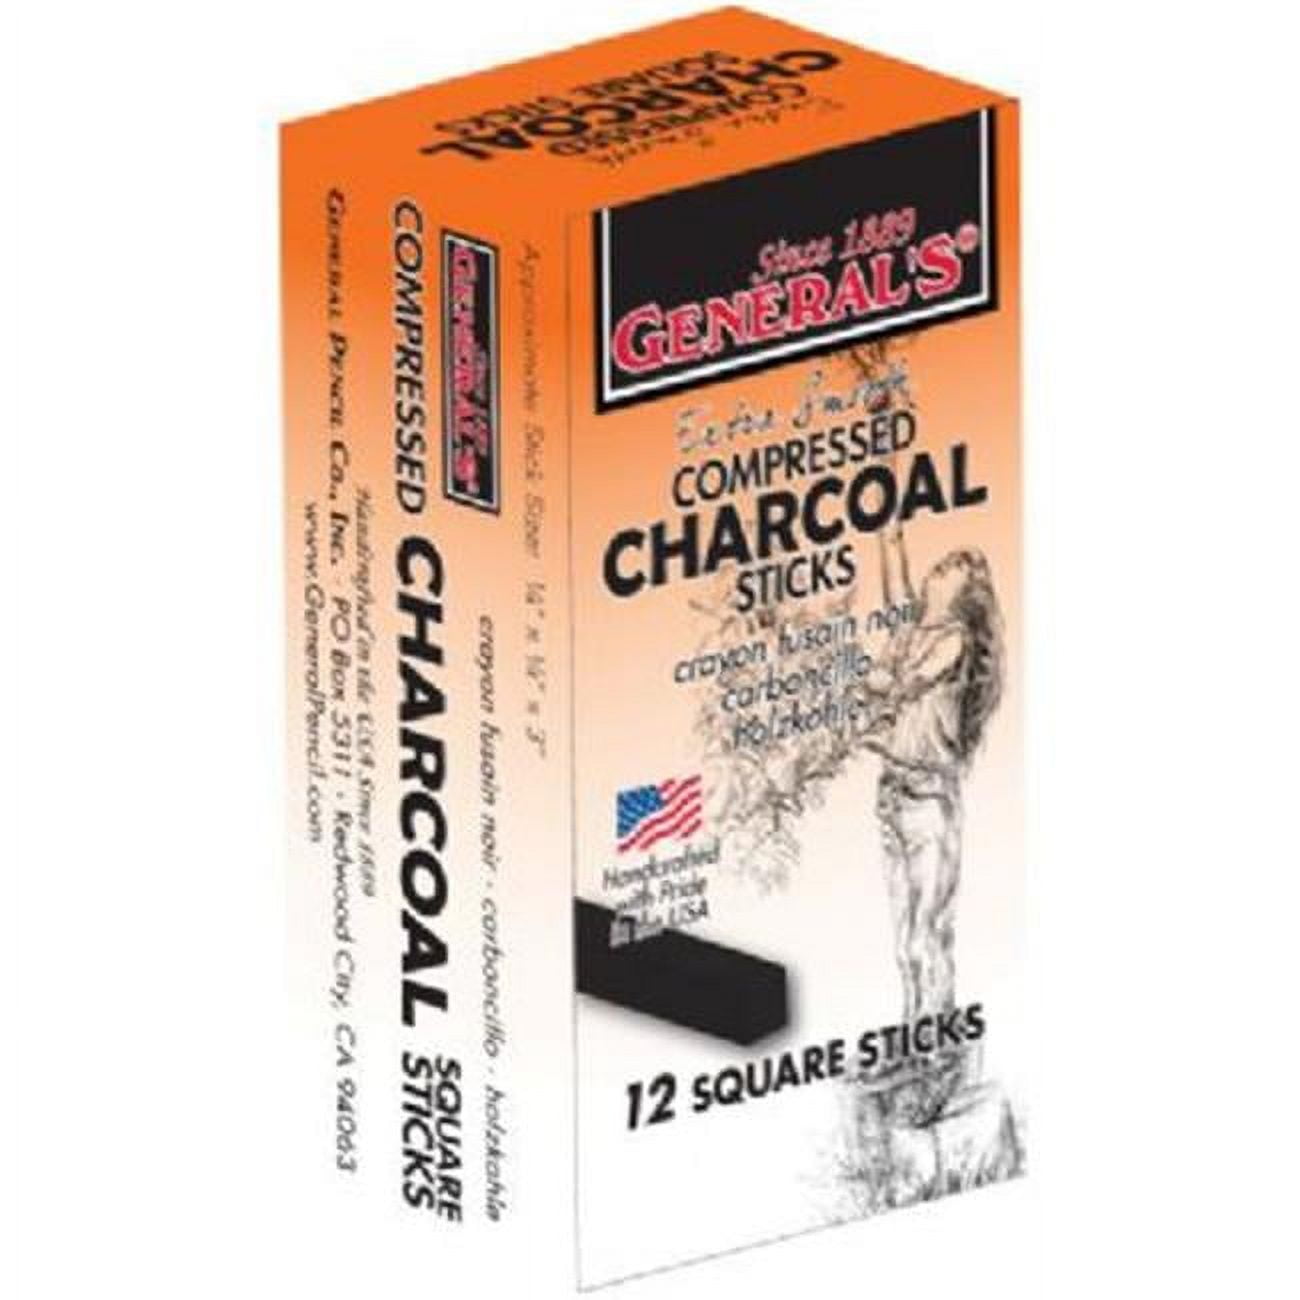 Richeson Natural Willow Charcoal Assortment